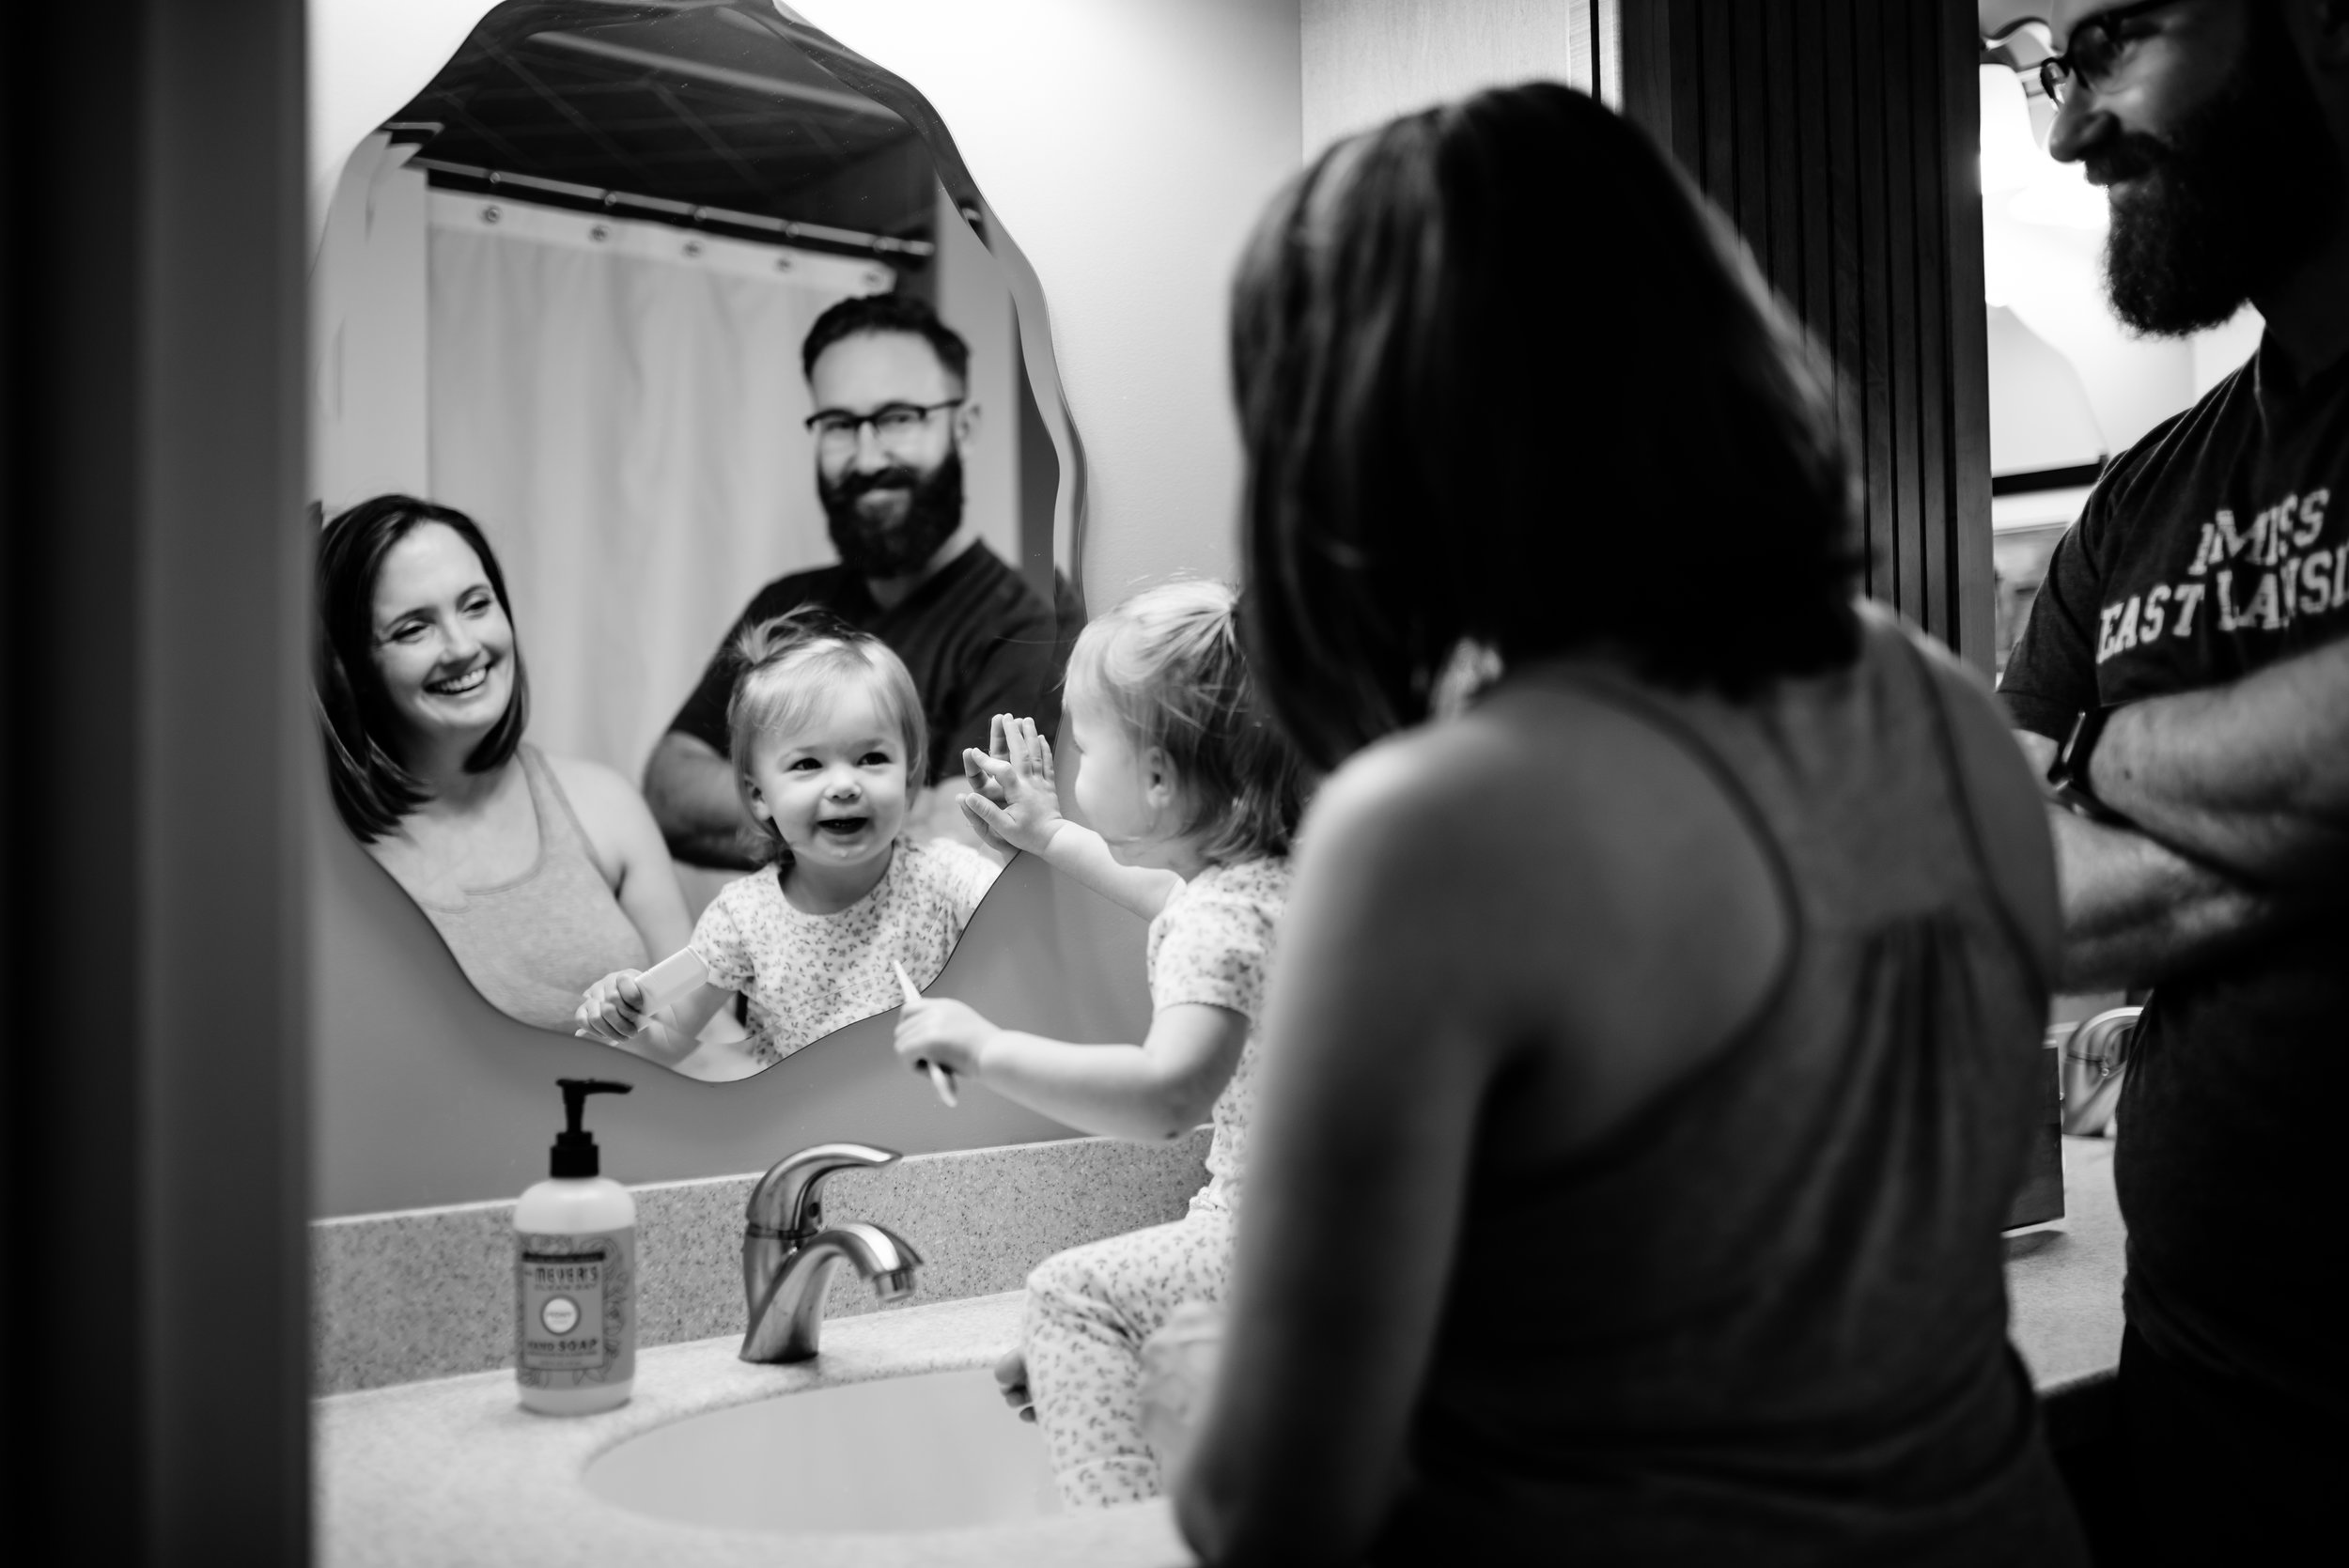 Parents and daughter smile at their reflection in bathroom mirror